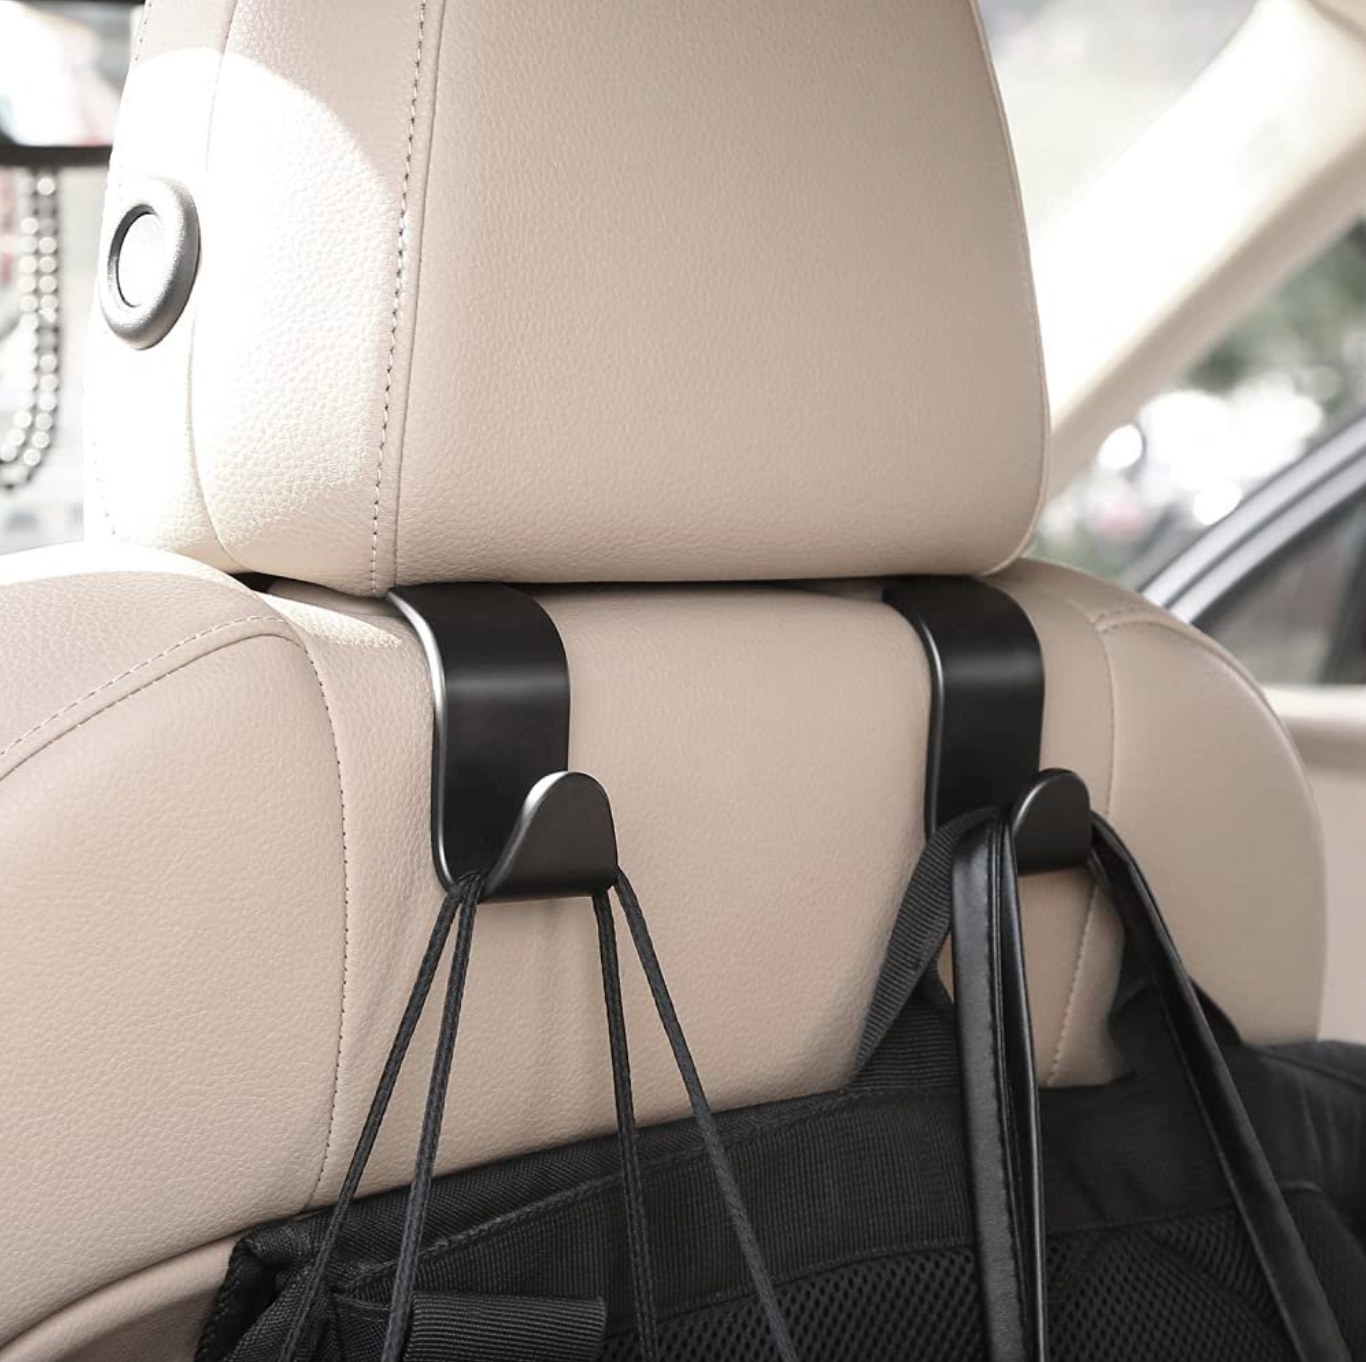 the black hooks holding several black bags on the back of a tan leather car seat